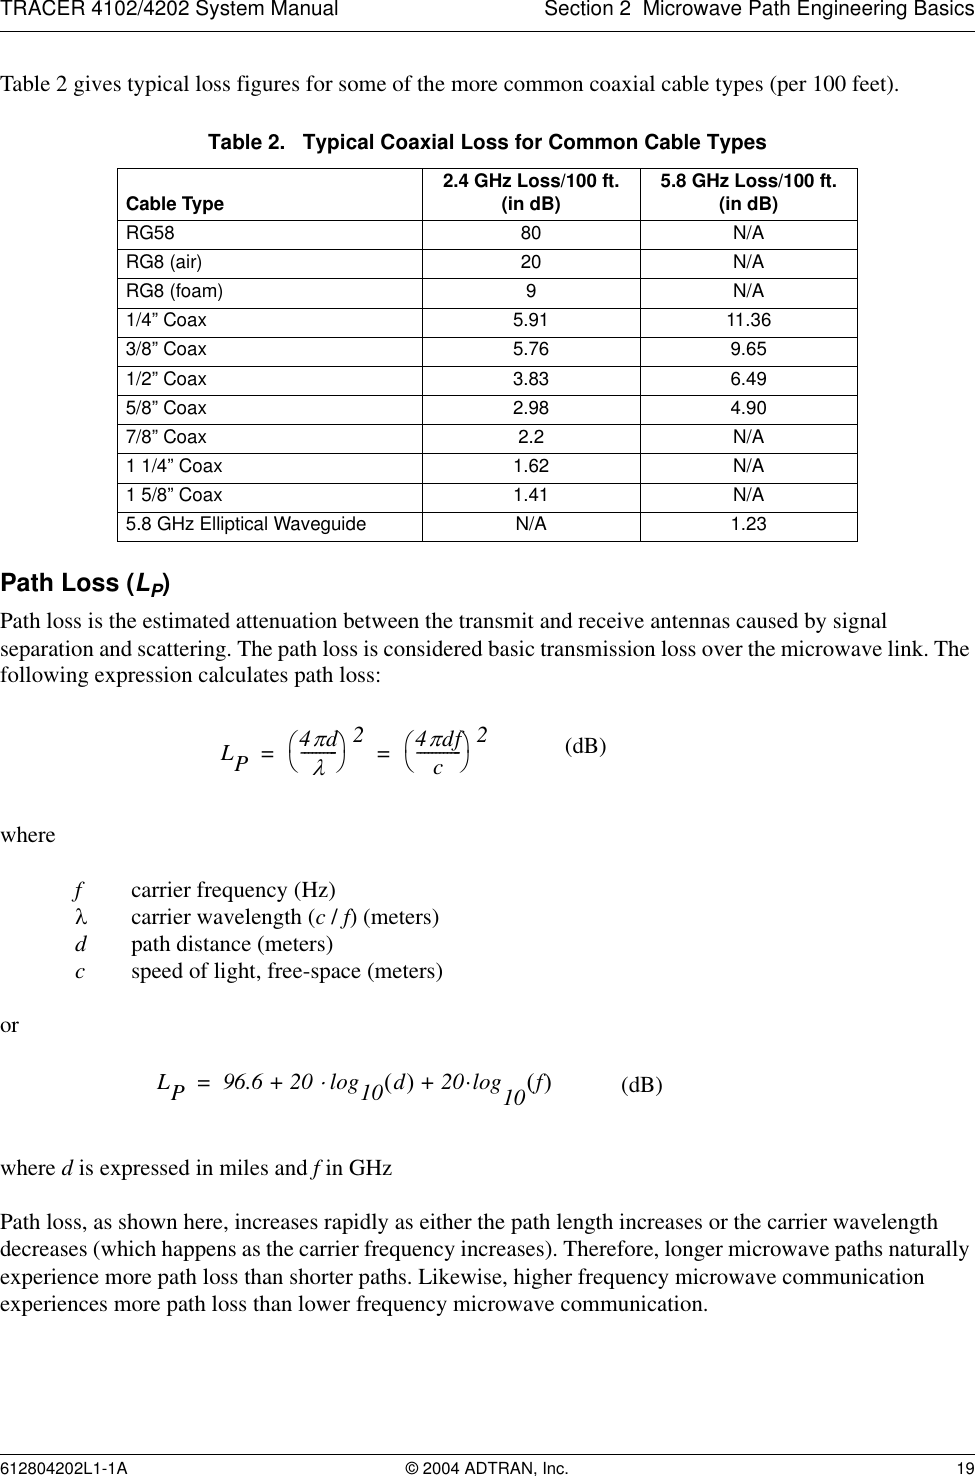 TRACER 4102/4202 System Manual Section 2  Microwave Path Engineering Basics612804202L1-1A © 2004 ADTRAN, Inc. 19Table 2 gives typical loss figures for some of the more common coaxial cable types (per 100 feet).Path Loss (LP)Path loss is the estimated attenuation between the transmit and receive antennas caused by signal separation and scattering. The path loss is considered basic transmission loss over the microwave link. The following expression calculates path loss:where fcarrier frequency (Hz)λcarrier wavelength (c / f) (meters)dpath distance (meters)cspeed of light, free-space (meters)orwhere d is expressed in miles and f in GHzPath loss, as shown here, increases rapidly as either the path length increases or the carrier wavelength decreases (which happens as the carrier frequency increases). Therefore, longer microwave paths naturally experience more path loss than shorter paths. Likewise, higher frequency microwave communication experiences more path loss than lower frequency microwave communication.Table 2.   Typical Coaxial Loss for Common Cable TypesCable Type 2.4 GHz Loss/100 ft. (in dB) 5.8 GHz Loss/100 ft. (in dB)RG58 80 N/ARG8 (air) 20 N/ARG8 (foam) 9 N/A1/4” Coax 5.91 11.363/8” Coax 5.76 9.651/2” Coax 3.83 6.495/8” Coax 2.98 4.907/8” Coax 2.2 N/A1 1/4” Coax 1.62 N/A1 5/8” Coax 1.41 N/A5.8 GHz Elliptical Waveguide N/A 1.23LP4πdλ----------24πdfc------------2== (dB)LP96.6 20 log10 d() 20·log+10 f()⋅+= (dB)